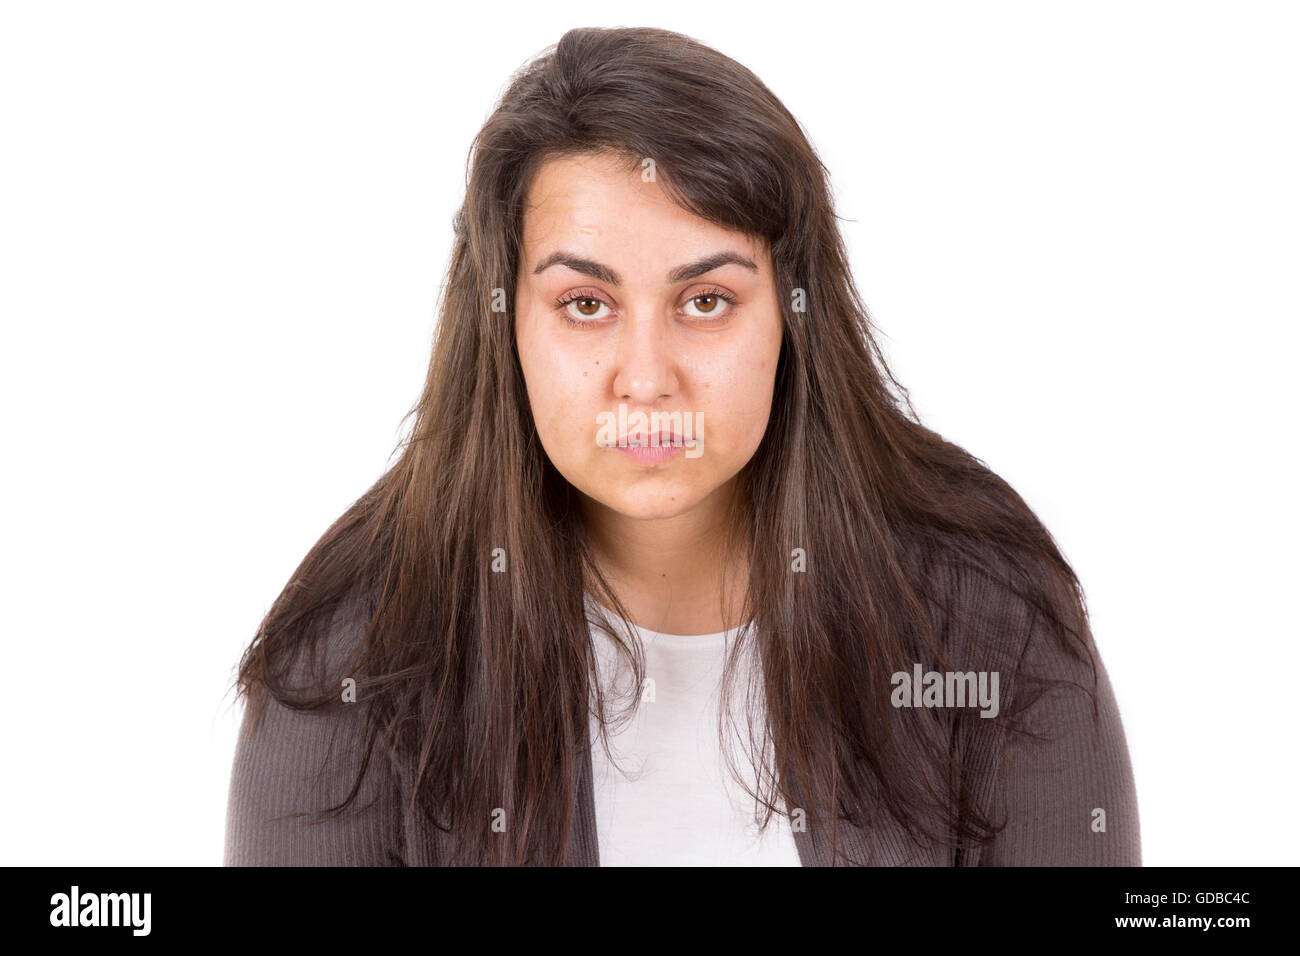 woman messy hair just woke up early isolated on white background Stock Photo